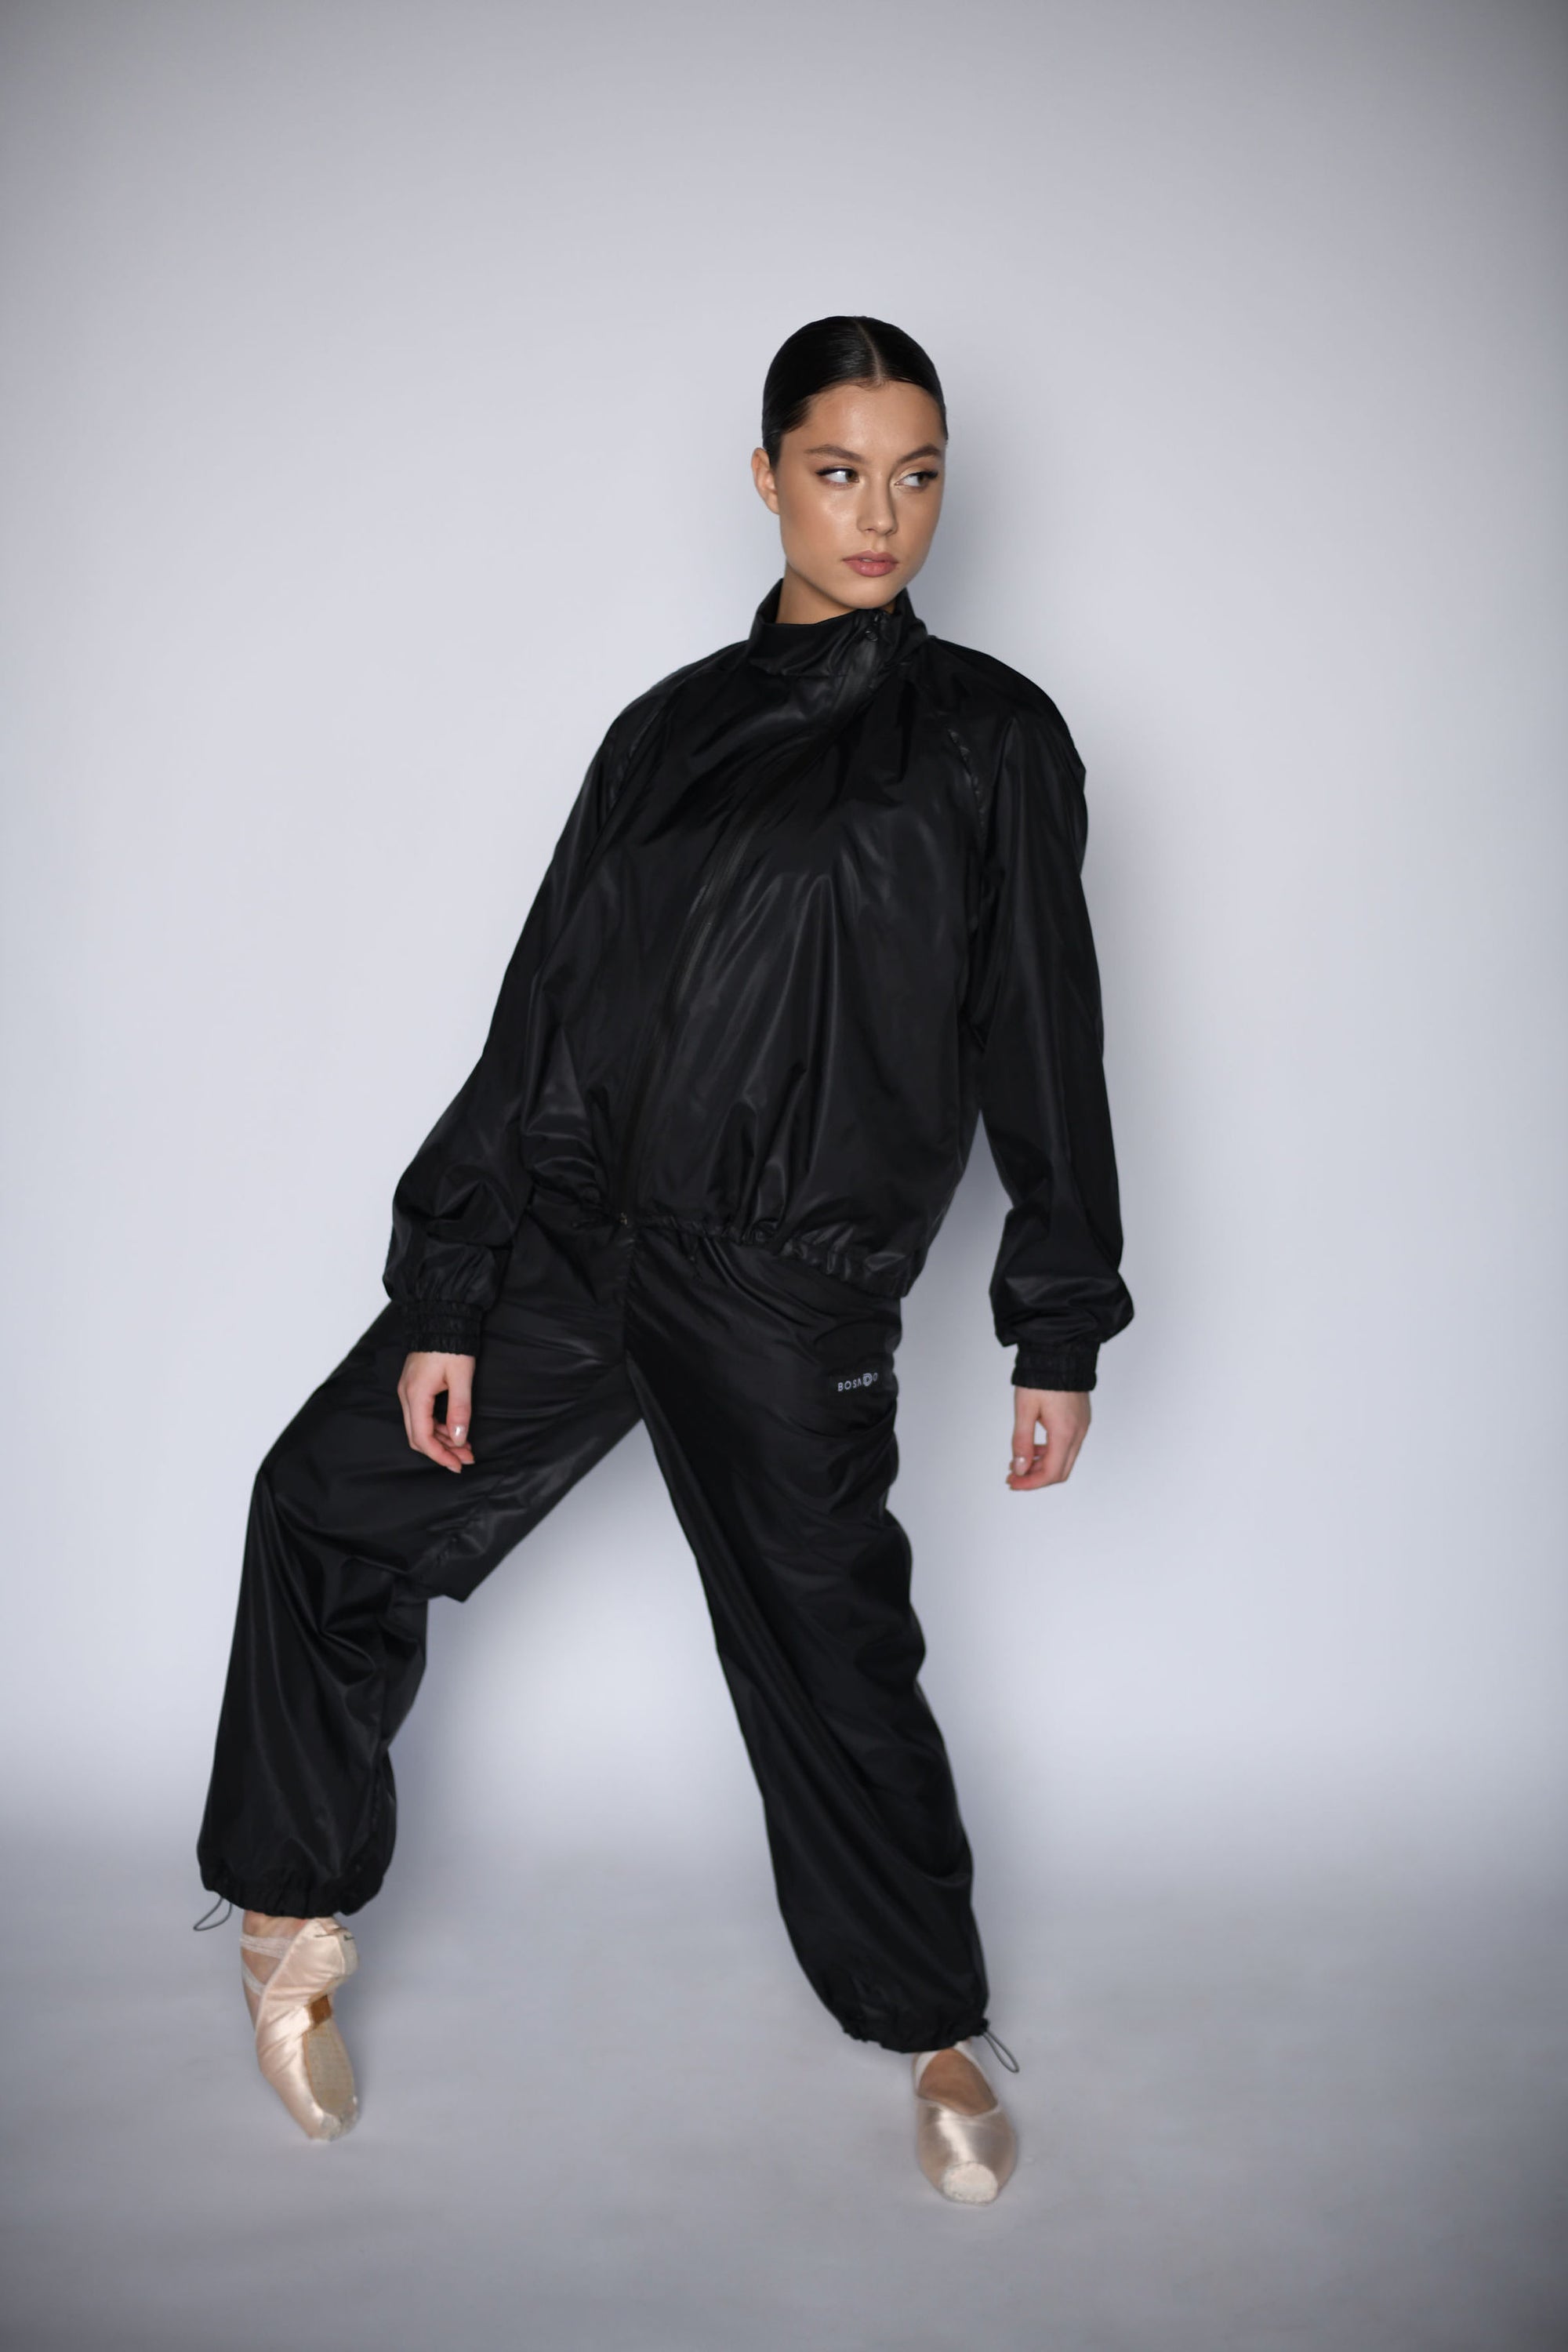 NEW URBAN SWAN COLLECTION S/S 23 | Black pearl sports suit with pants